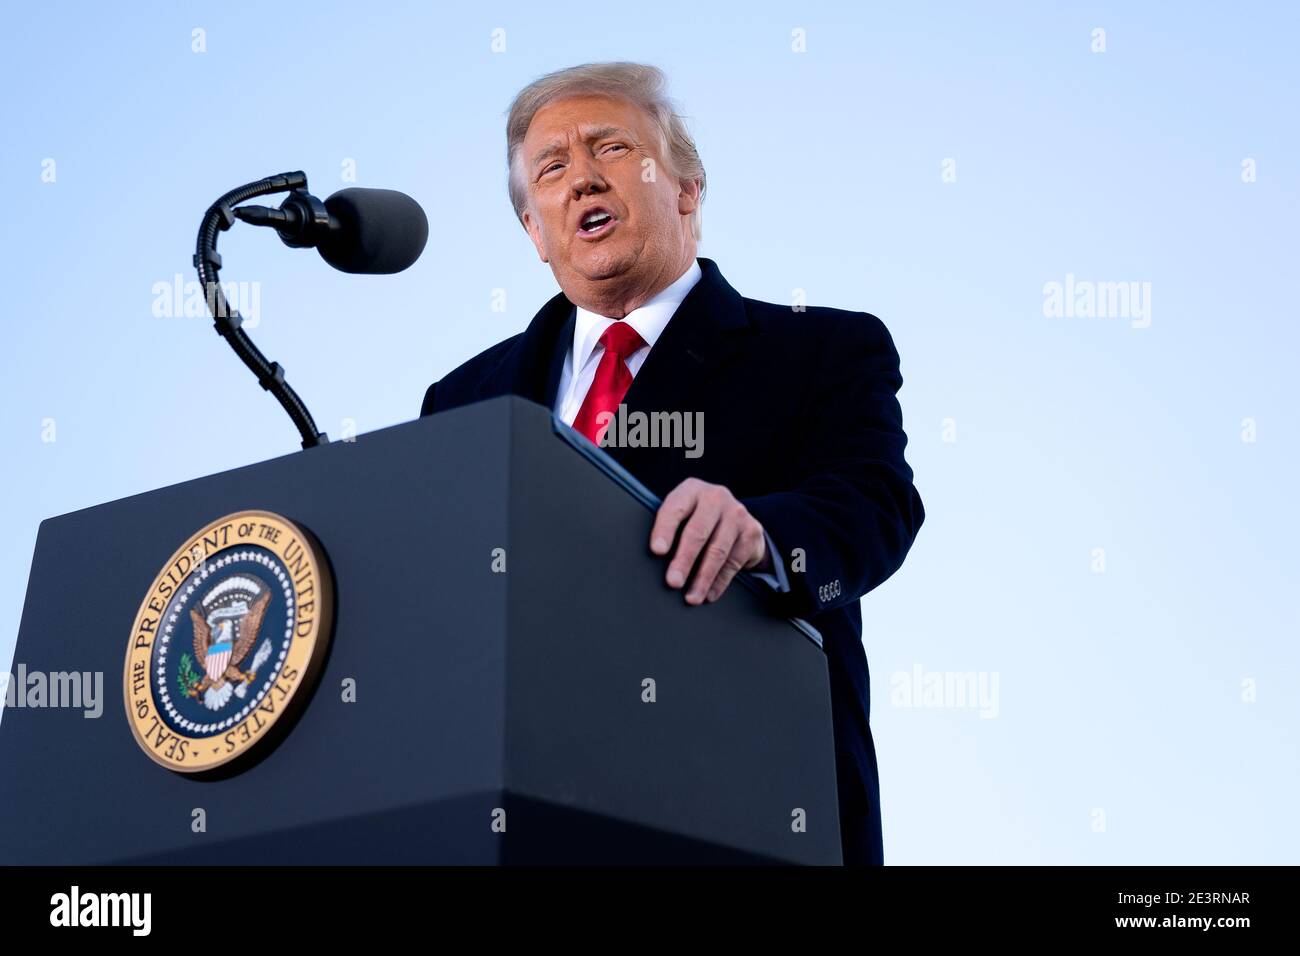 U.S. President Donald Trump speaks during a farewell ceremony at Joint Base Andrews, Maryland, U.S., on Wednesday, Jan. 20, 2021. Trump departs Washington with Americans more politically divided and more likely to be out of work than when he arrived, while awaiting trial for his second impeachment - an ignominious end to one of the most turbulent presidencies in American history. Credit: Stefani Reynolds/Pool via CNP/MediaPunch Stock Photo